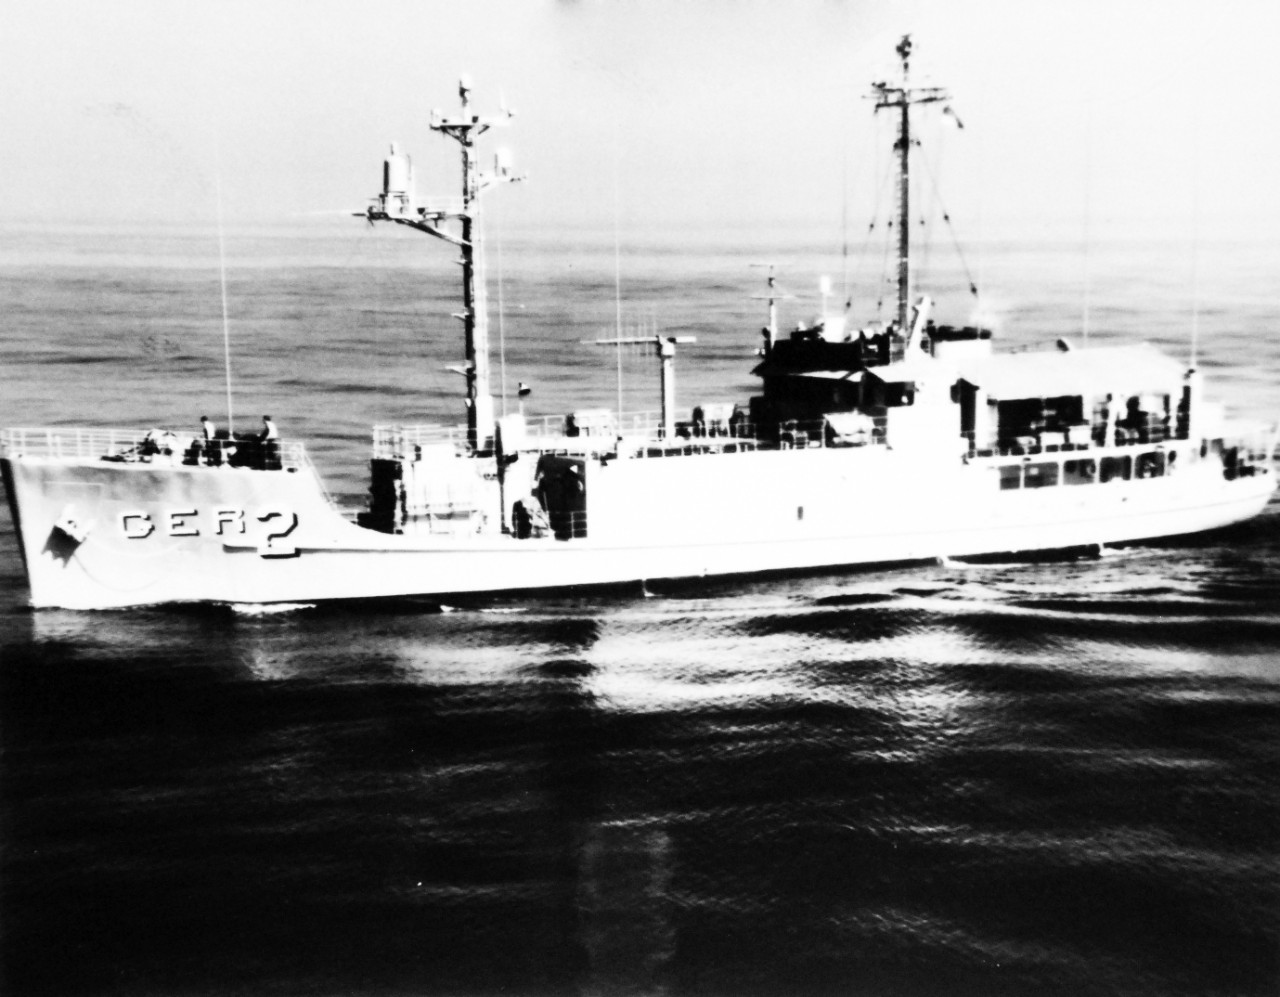 428-GX-USN-1129208: USS Pueblo (AGER-2), 1967. The environmental research ship underway off the coast of San Diego, California. Photographed by PHCS J.M. Larh, October 19, 1967. 